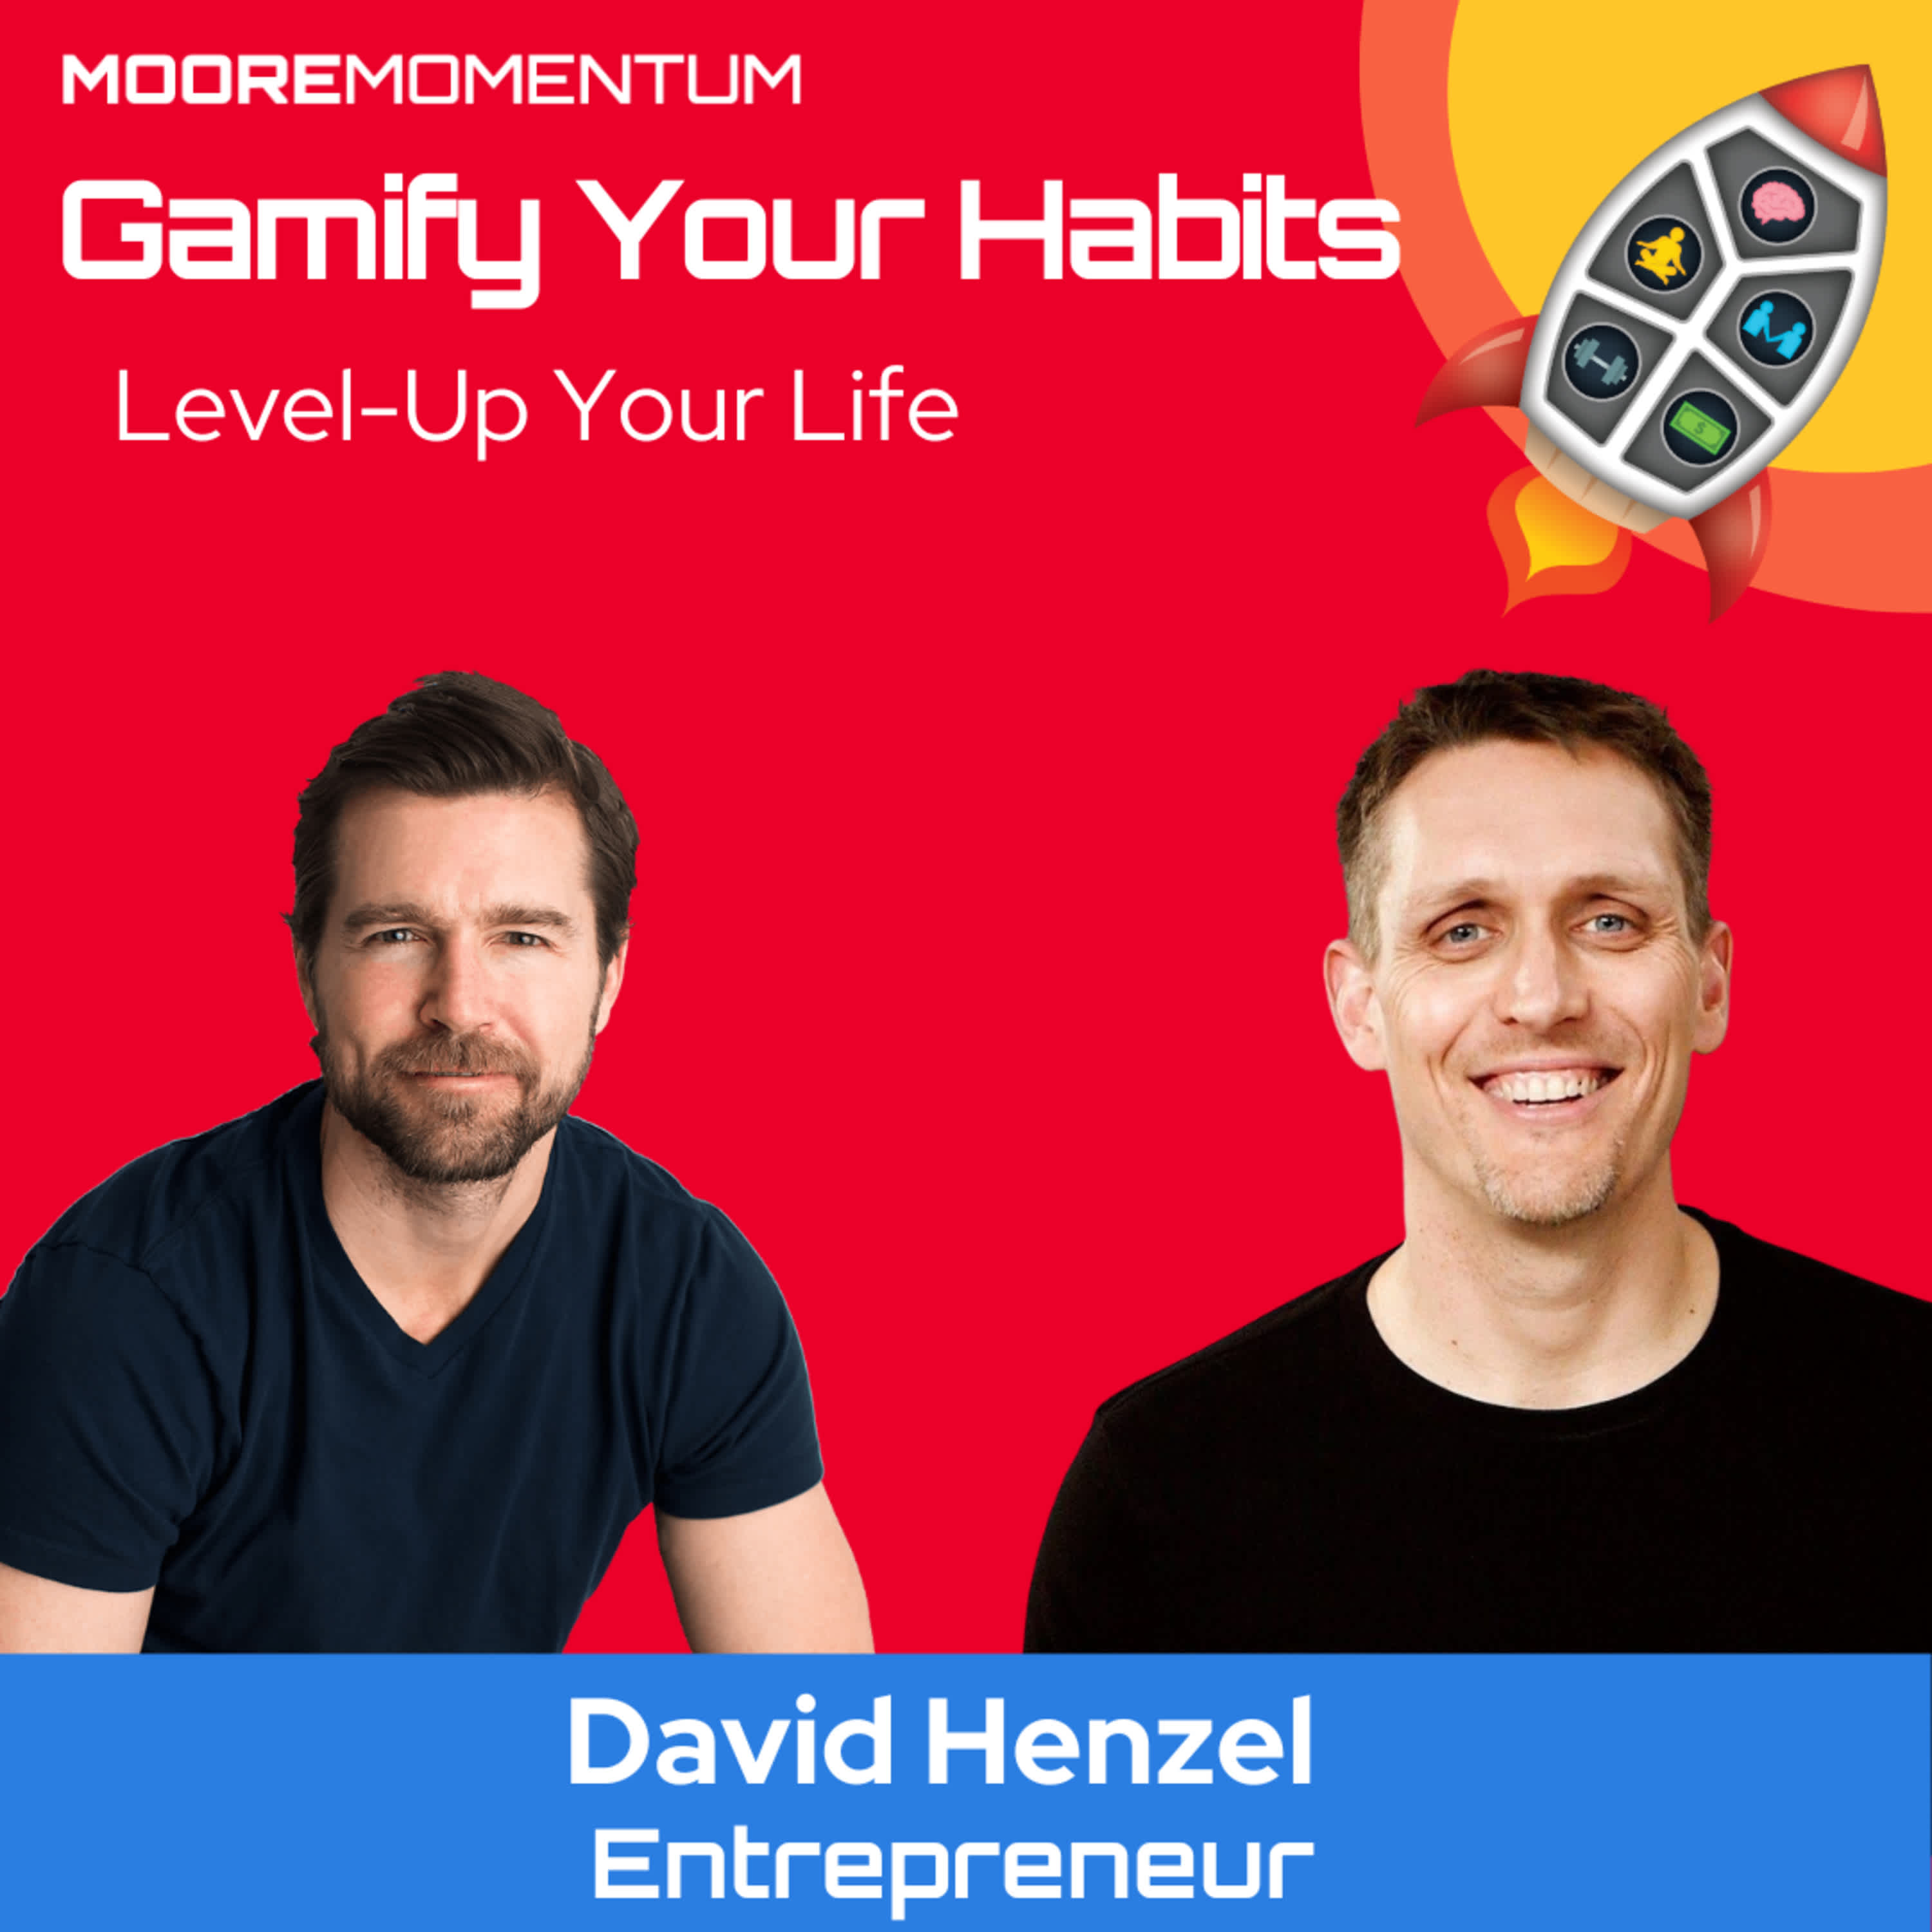 In the Ultimate Habit Tracking System, host Will Moore sits down with David Henzel, to discuss the power of habits. David shares how to effectively identify your bad habits and replace them with good habits